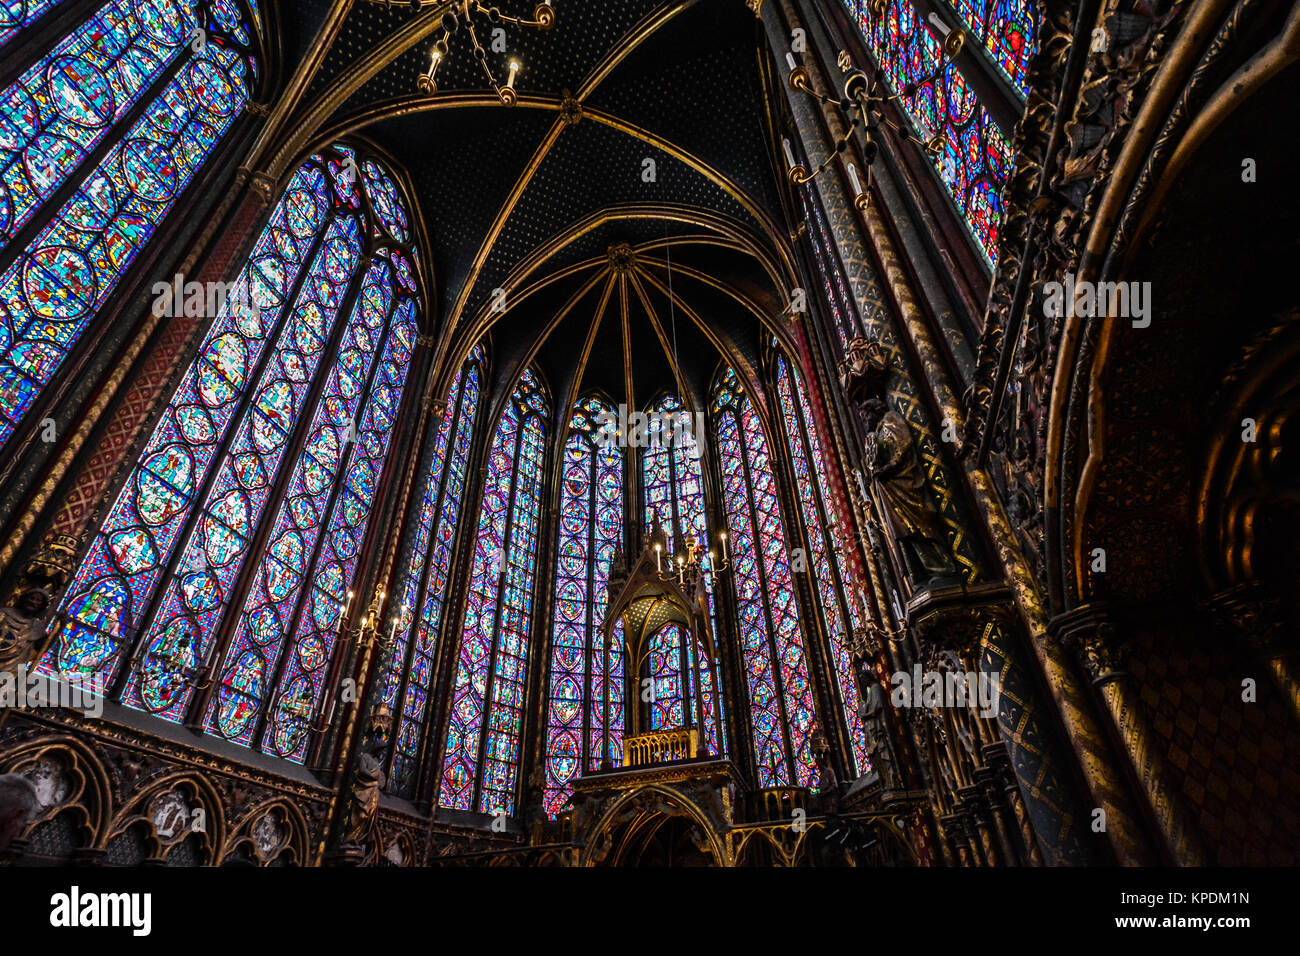 A portion of the stained glass on the interior of Sainte-Chapelle, the Gothic royal chapel on the ile de la Cite in Paris France Stock Photo